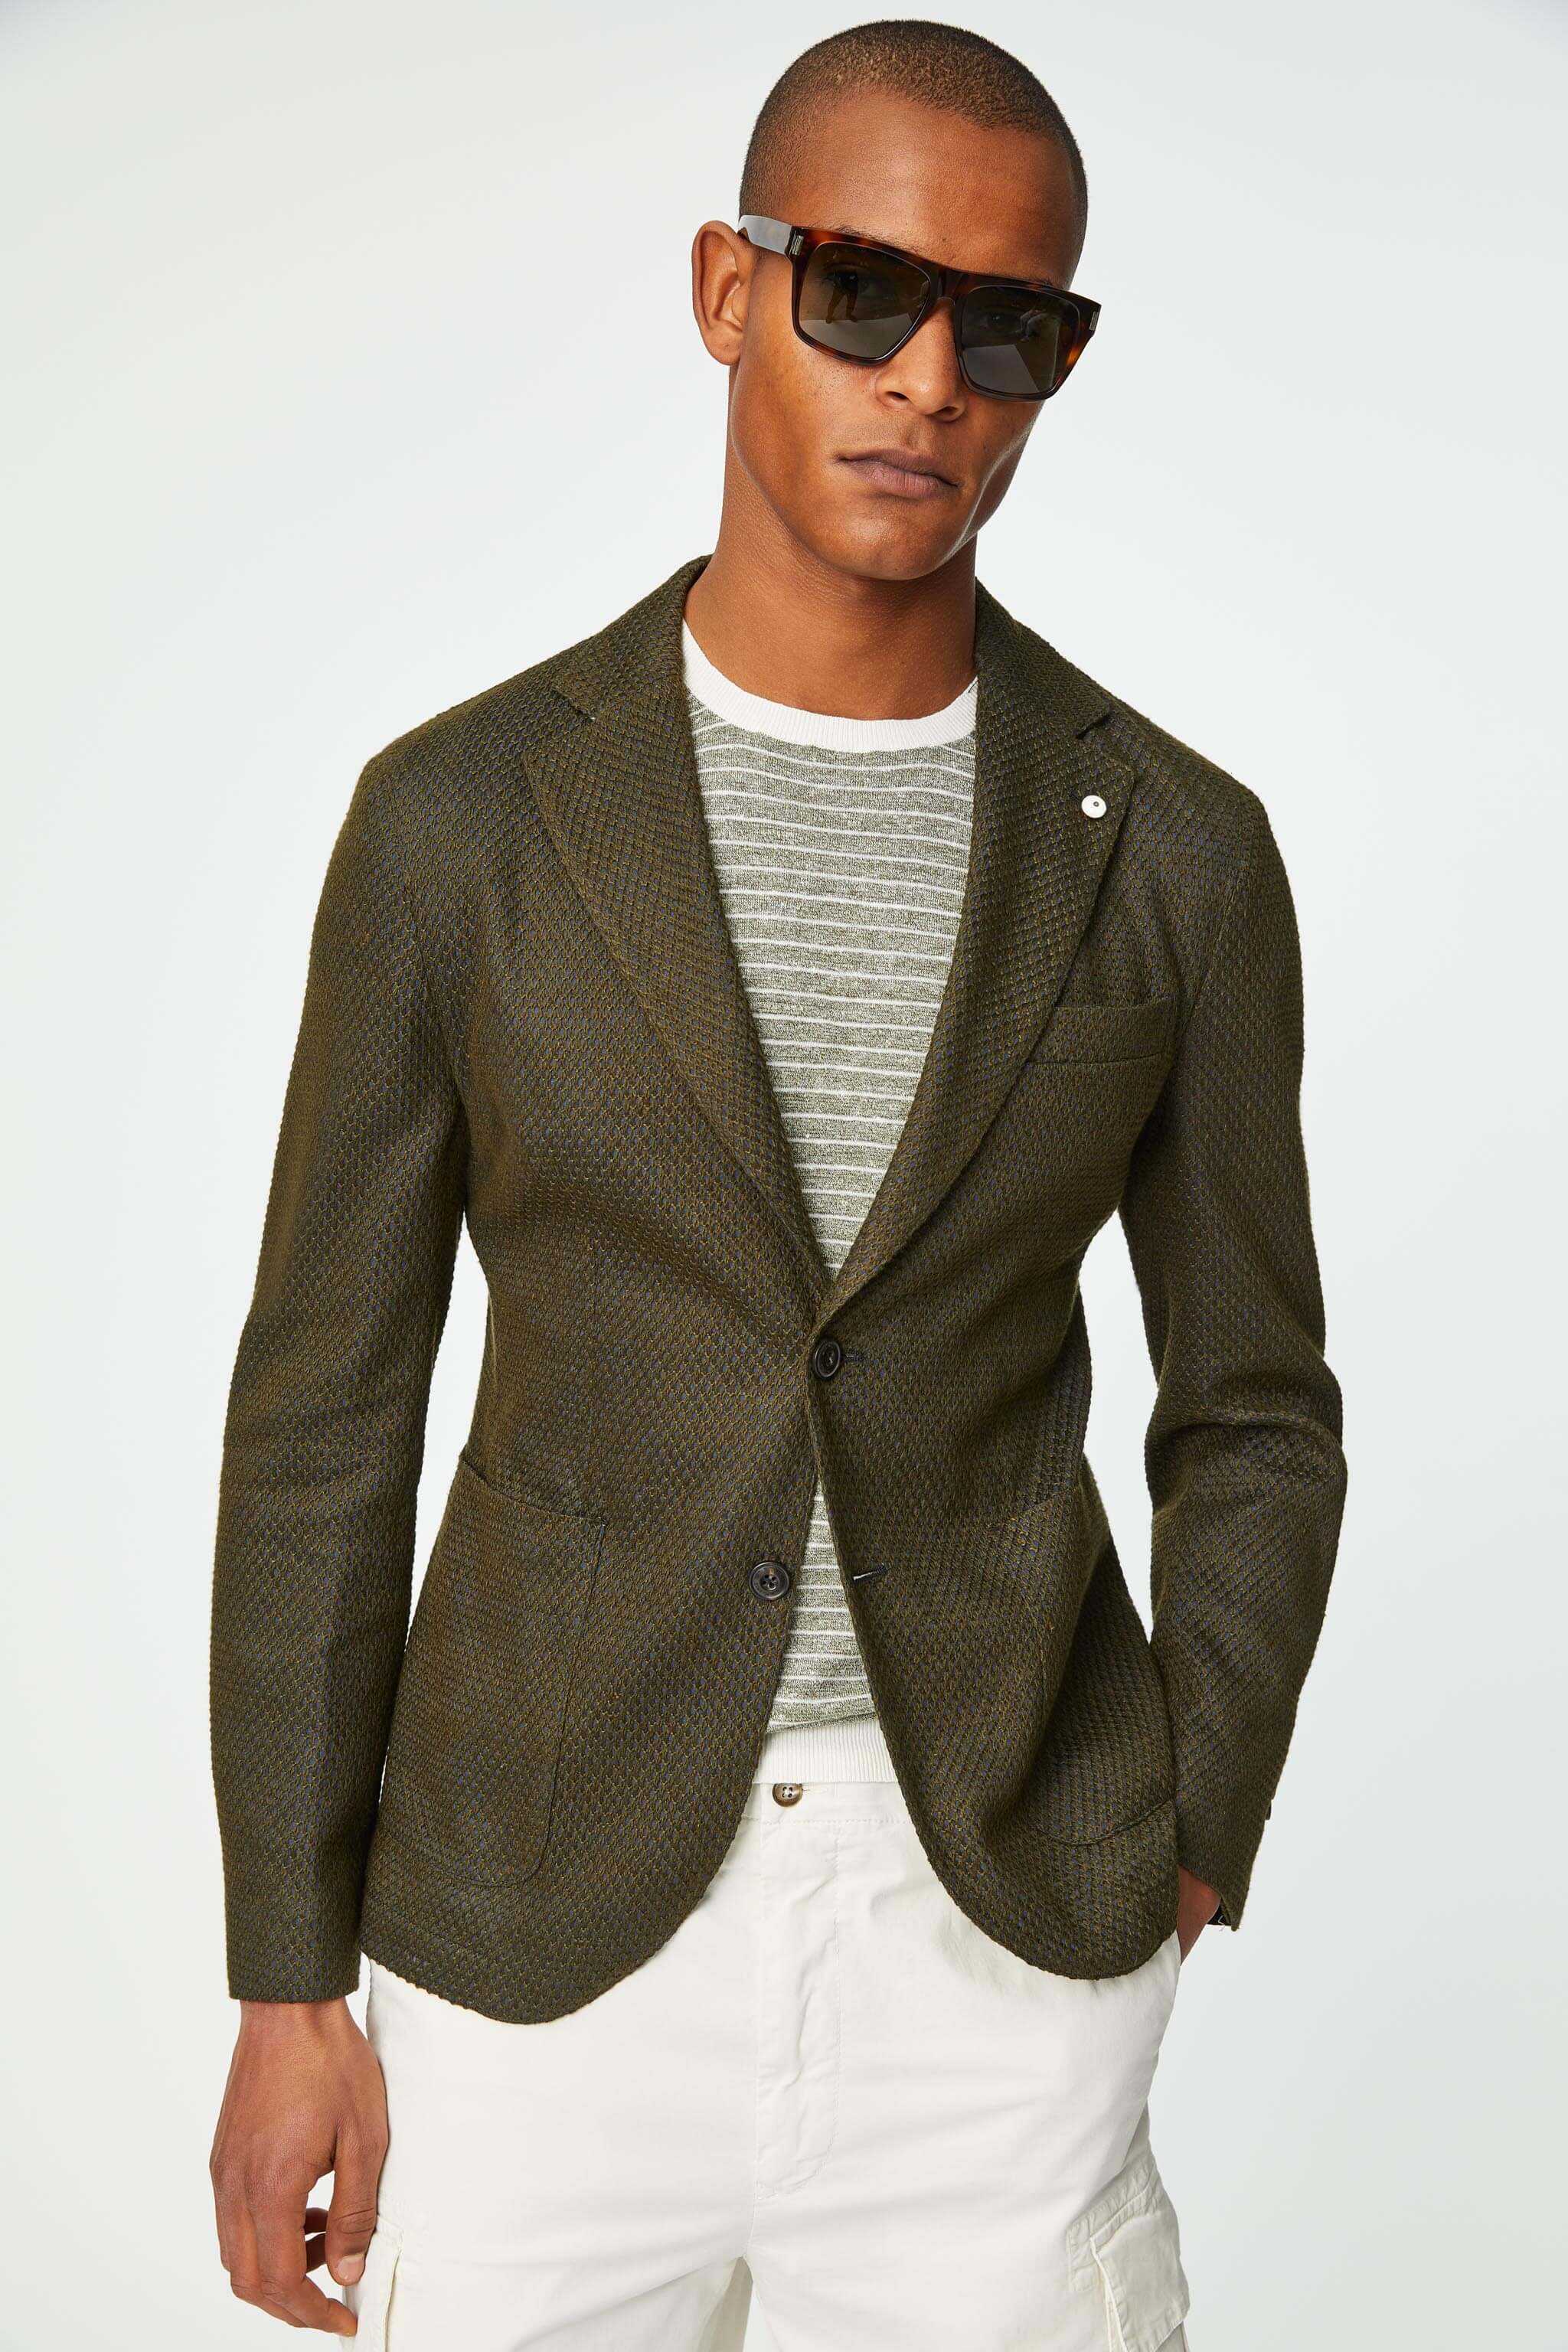 PUNTO jacket in army green